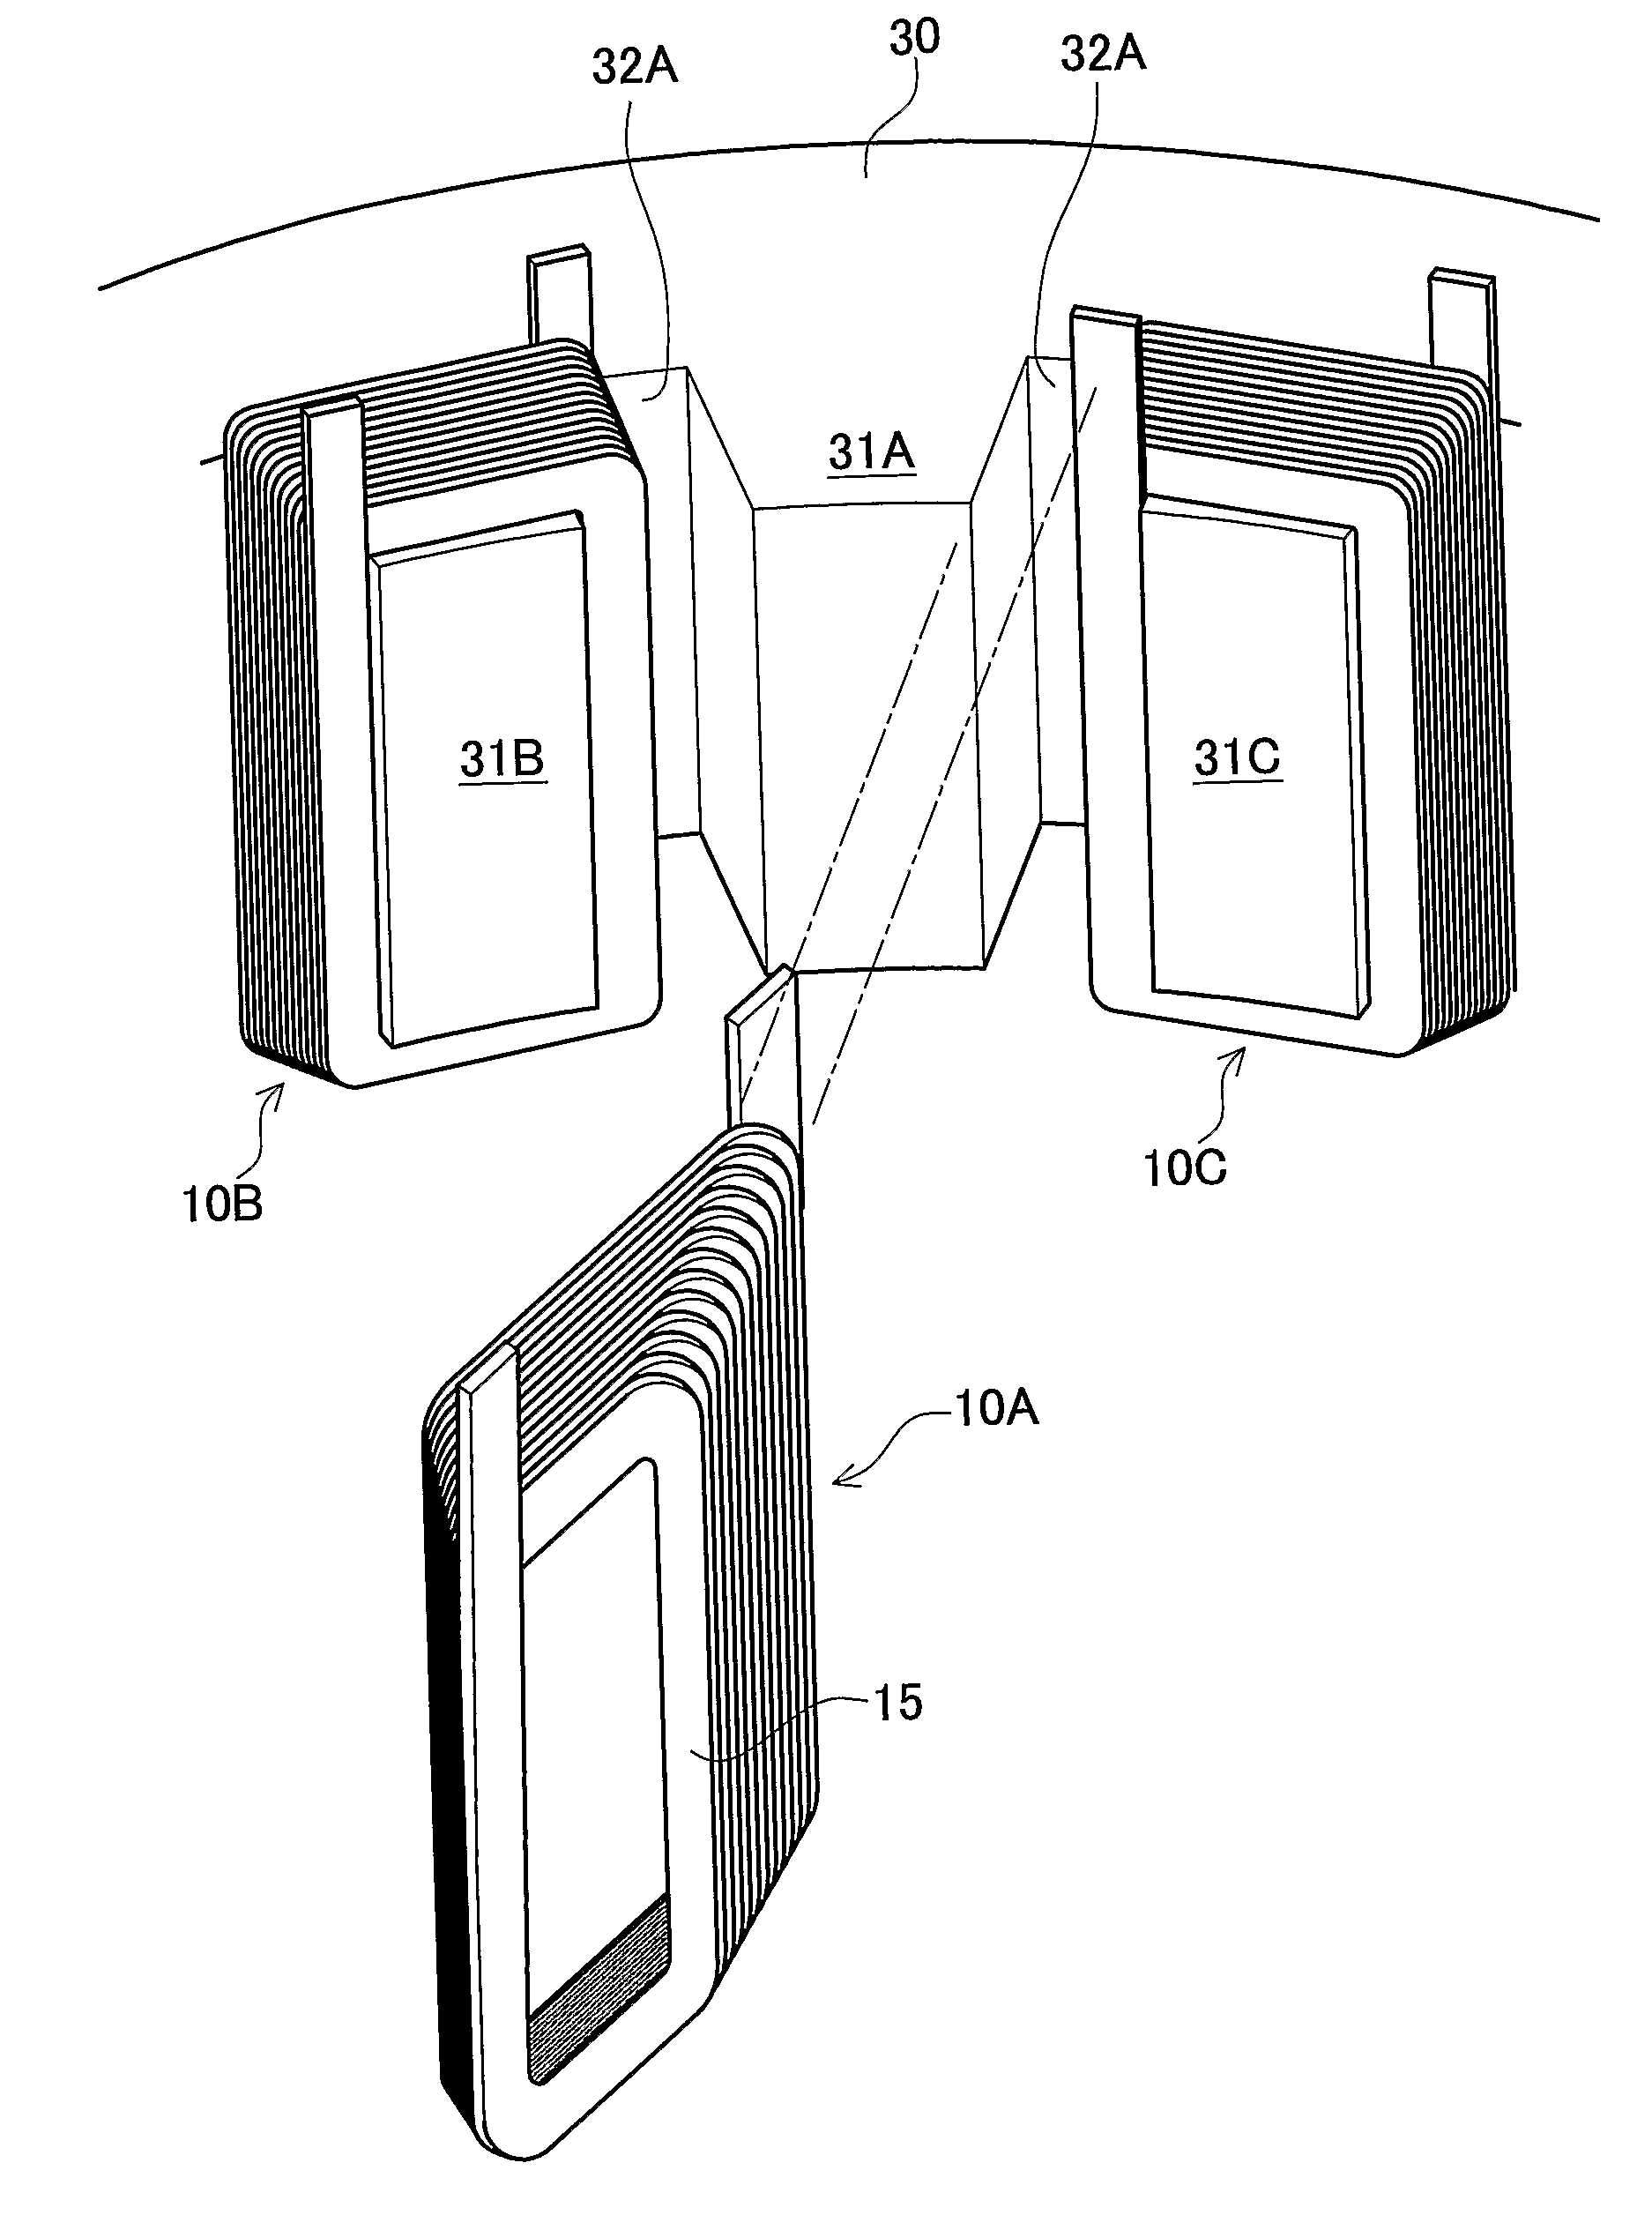 Insertion of pre-fabricated concentrated windings into stator slots